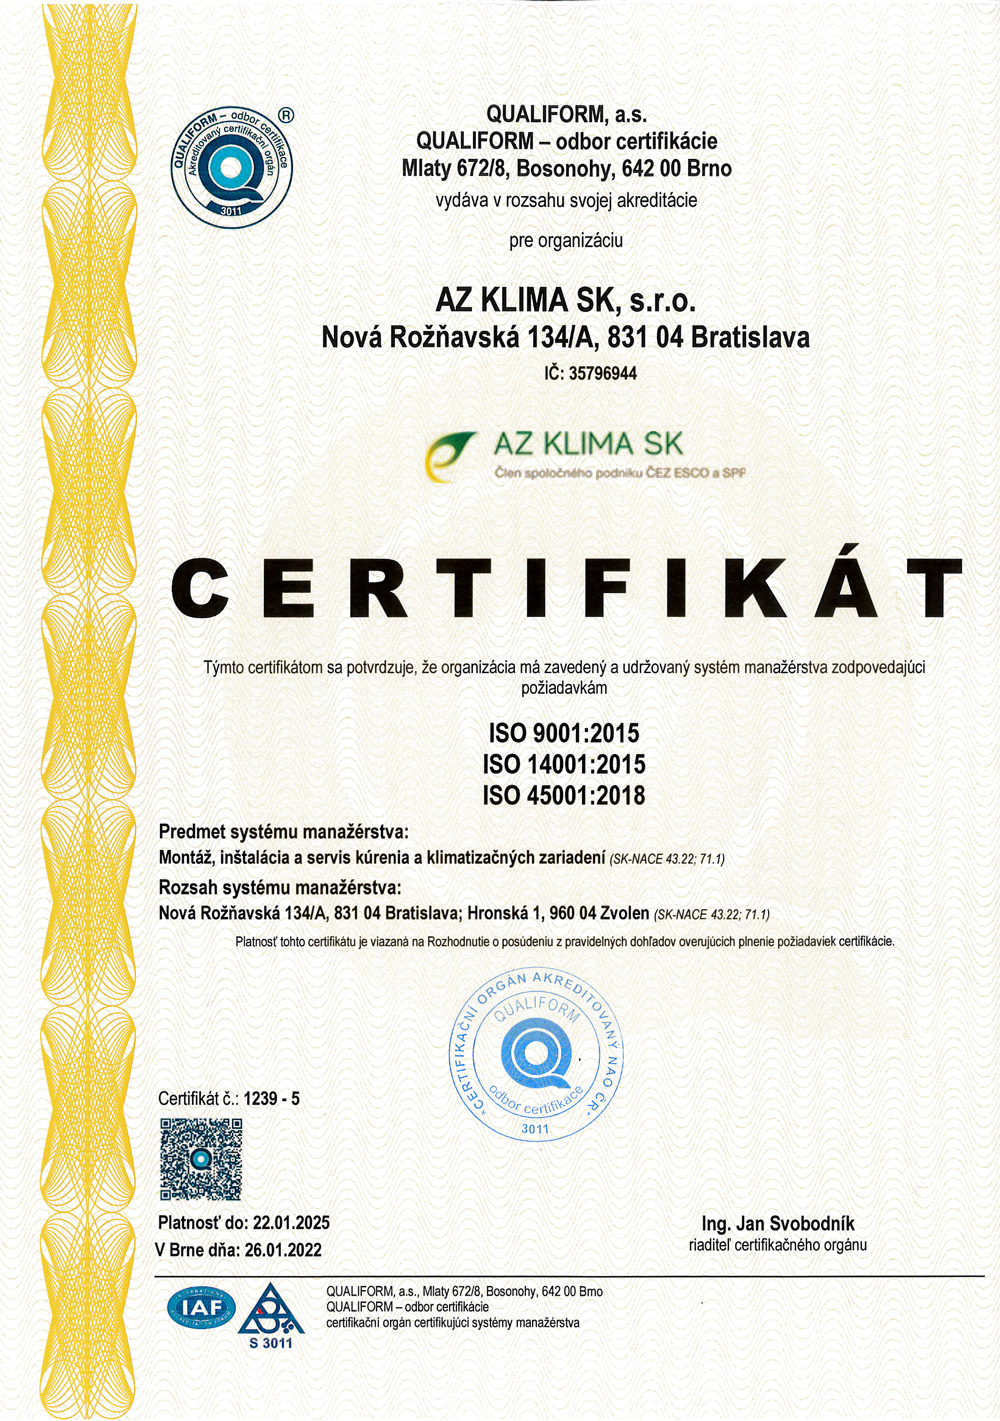 ISO 9001, 14001, 45001